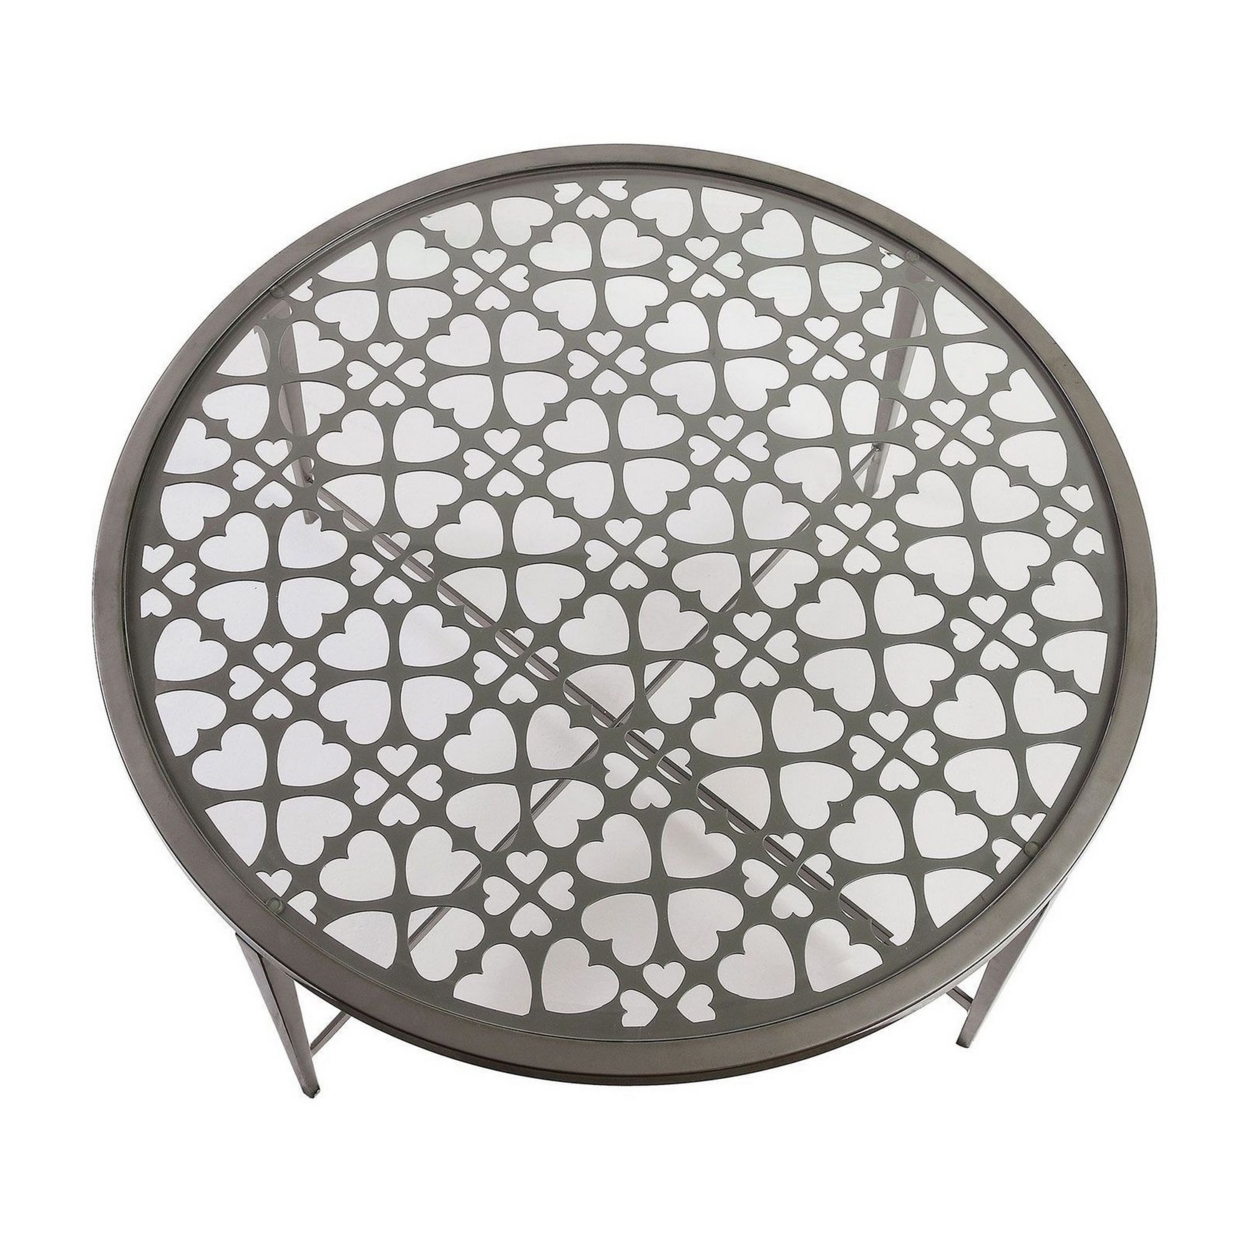 Round Glass Top Coffee Table With X Support Metal Base, Silver- Saltoro Sherpi